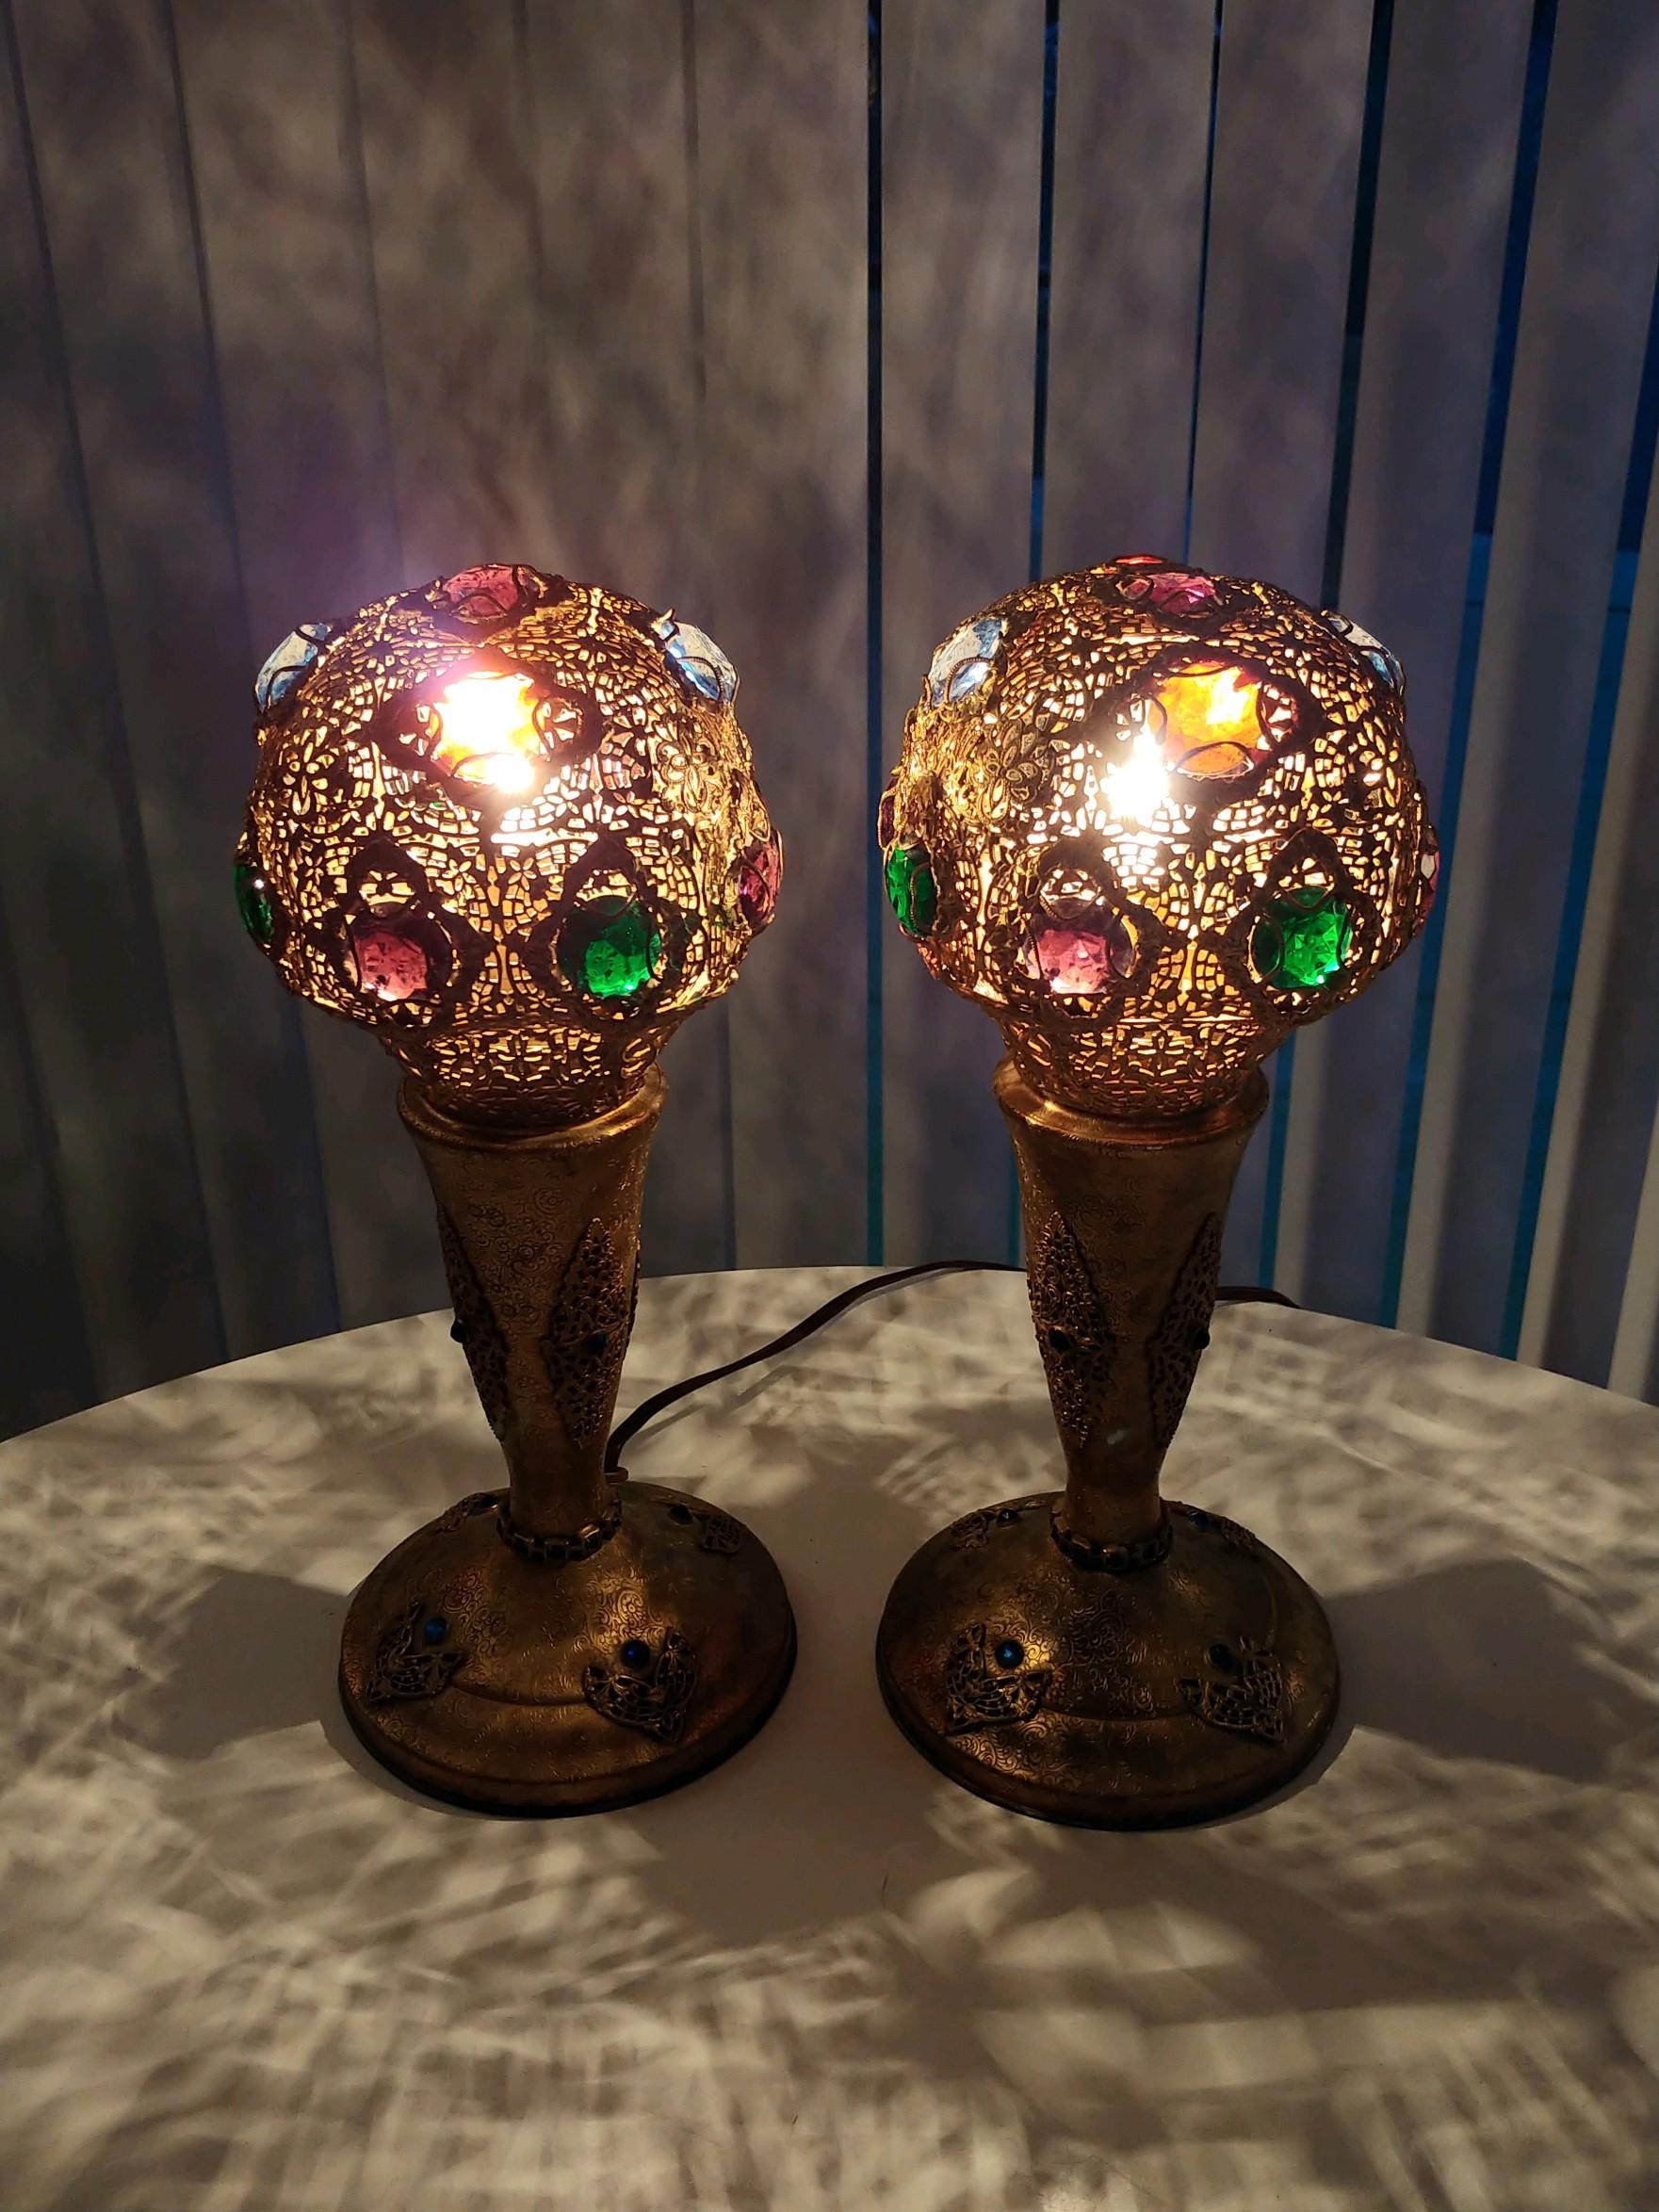 A matched pair of circa 1920's jeweled and filigreed accent lamps by Apollo Studios of New York. These are unsigned but are unmistakably Apollo Studios. Purple, amber, blue and green jewels are set into the removable shades and the bases are adorned